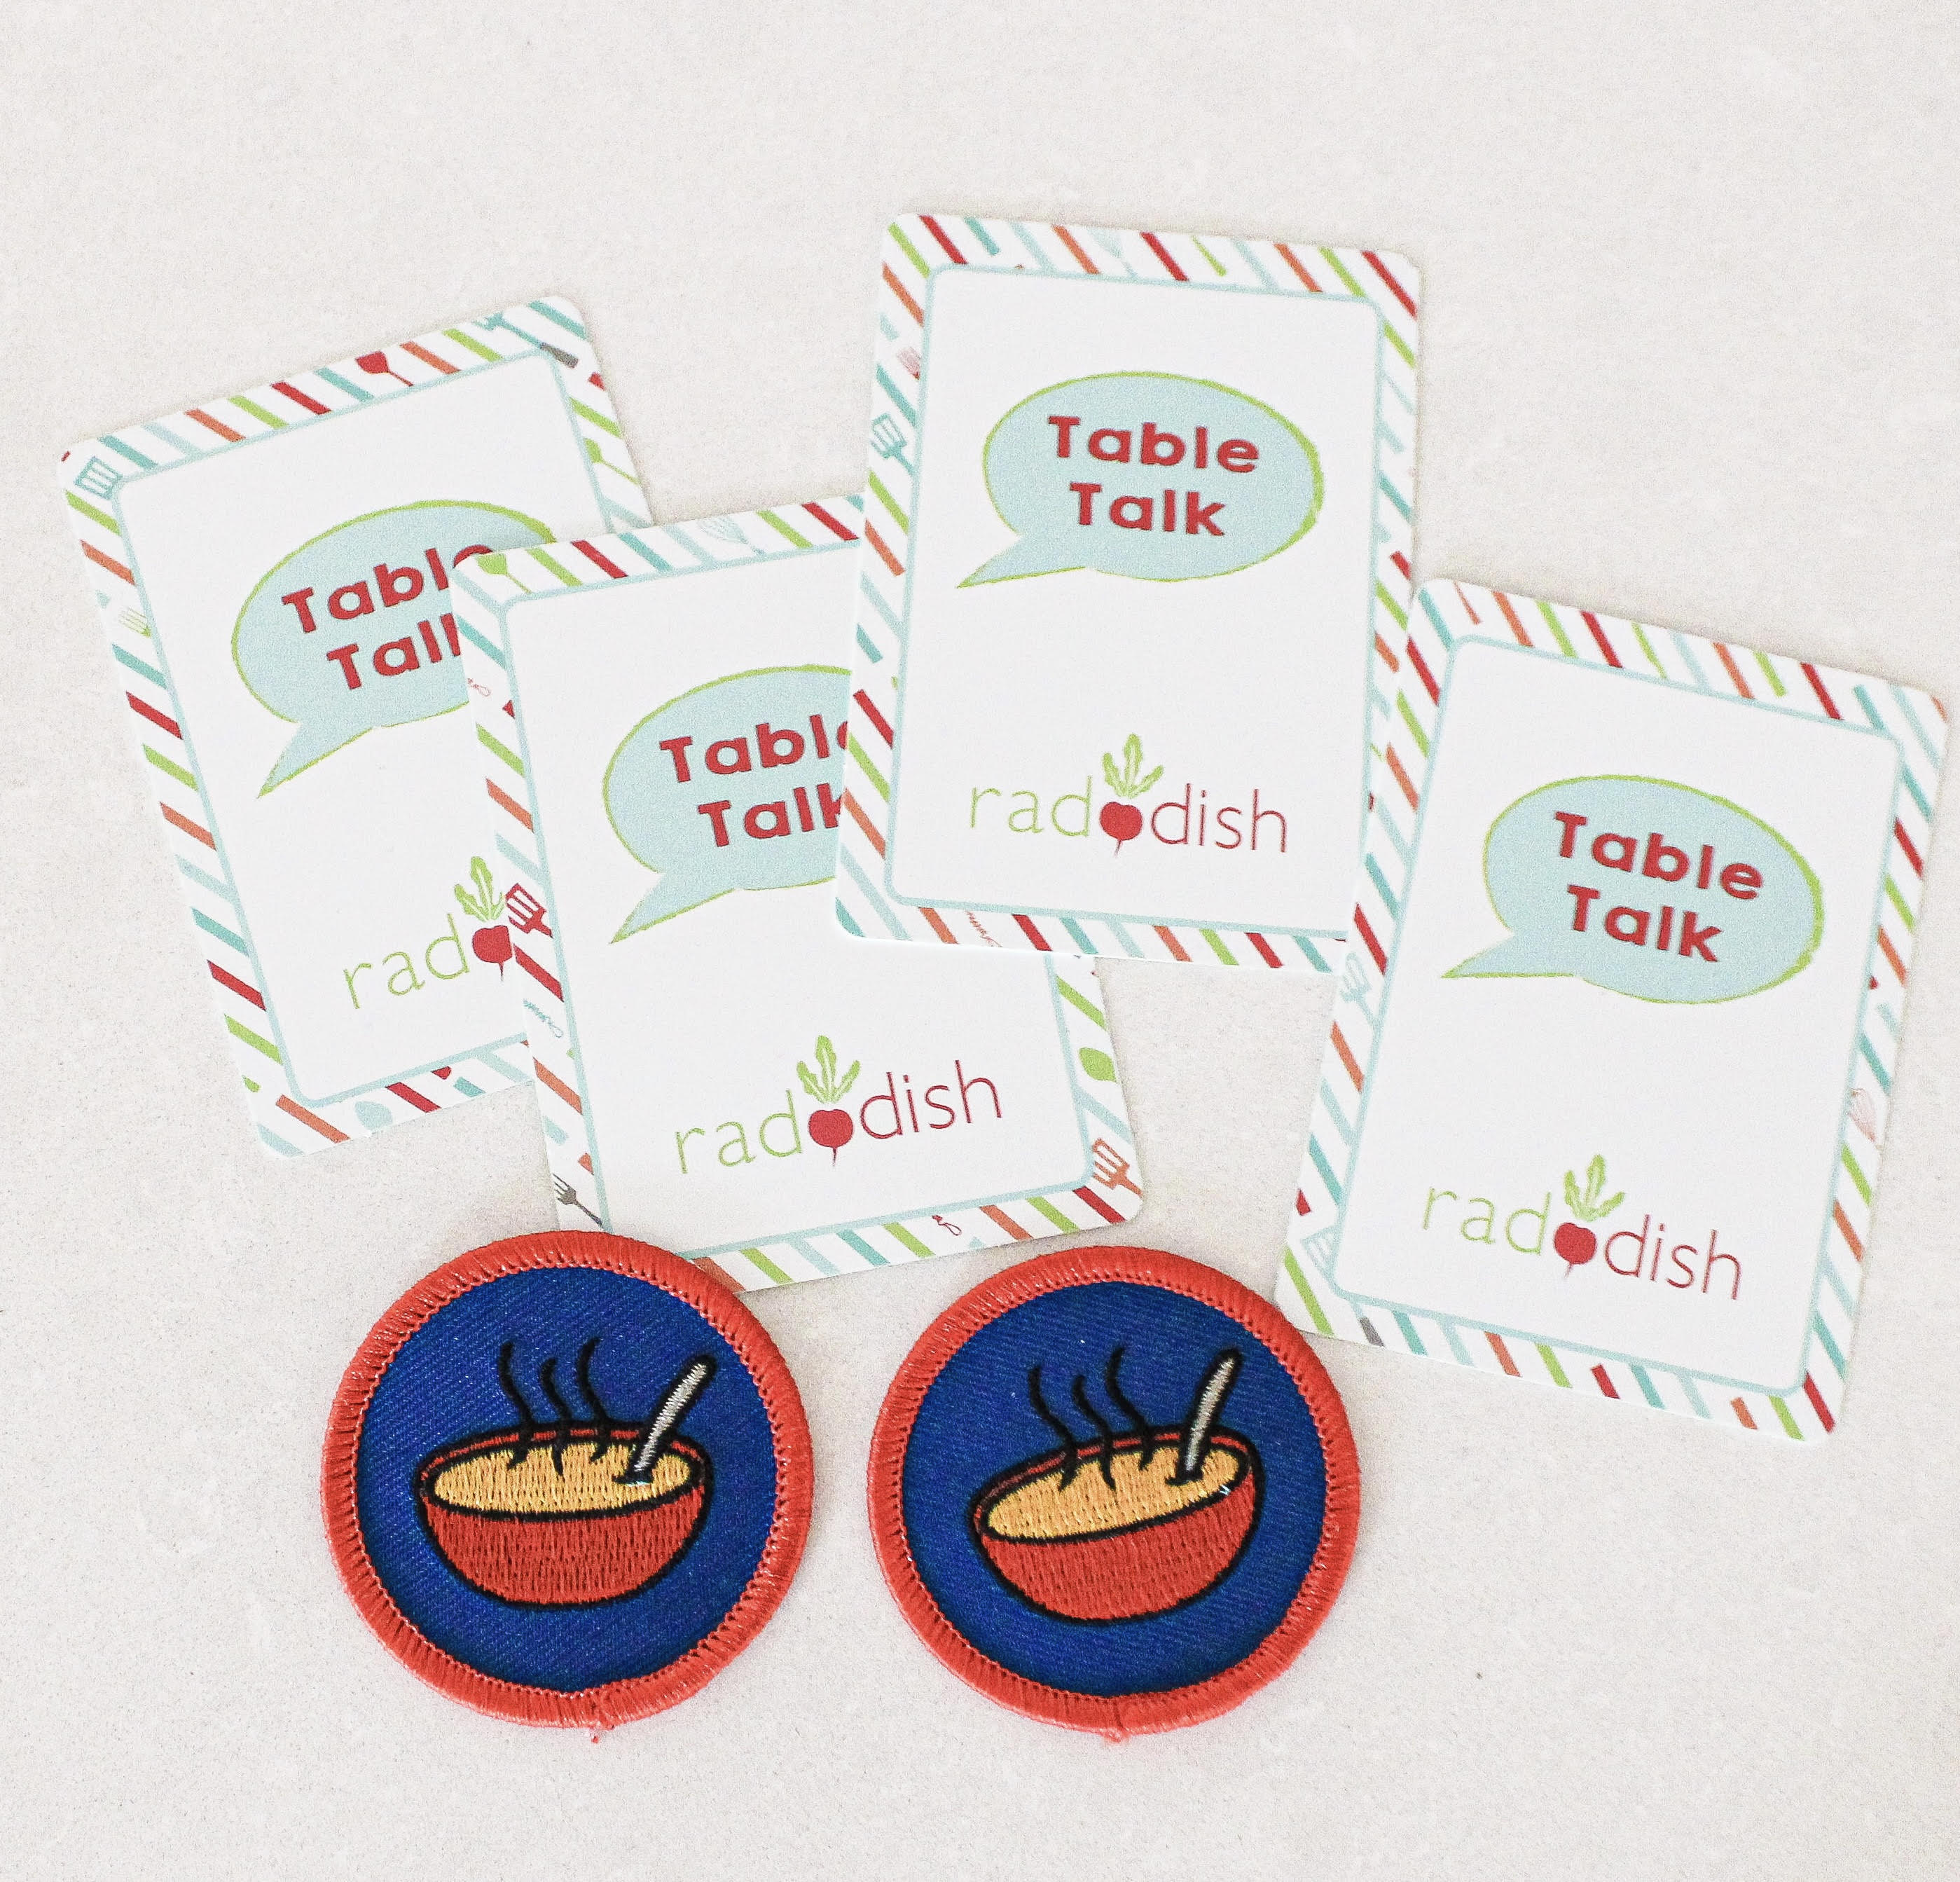 Raddish Cooking Club For Kids table talk cards and fun badges kids can earn while cooking!